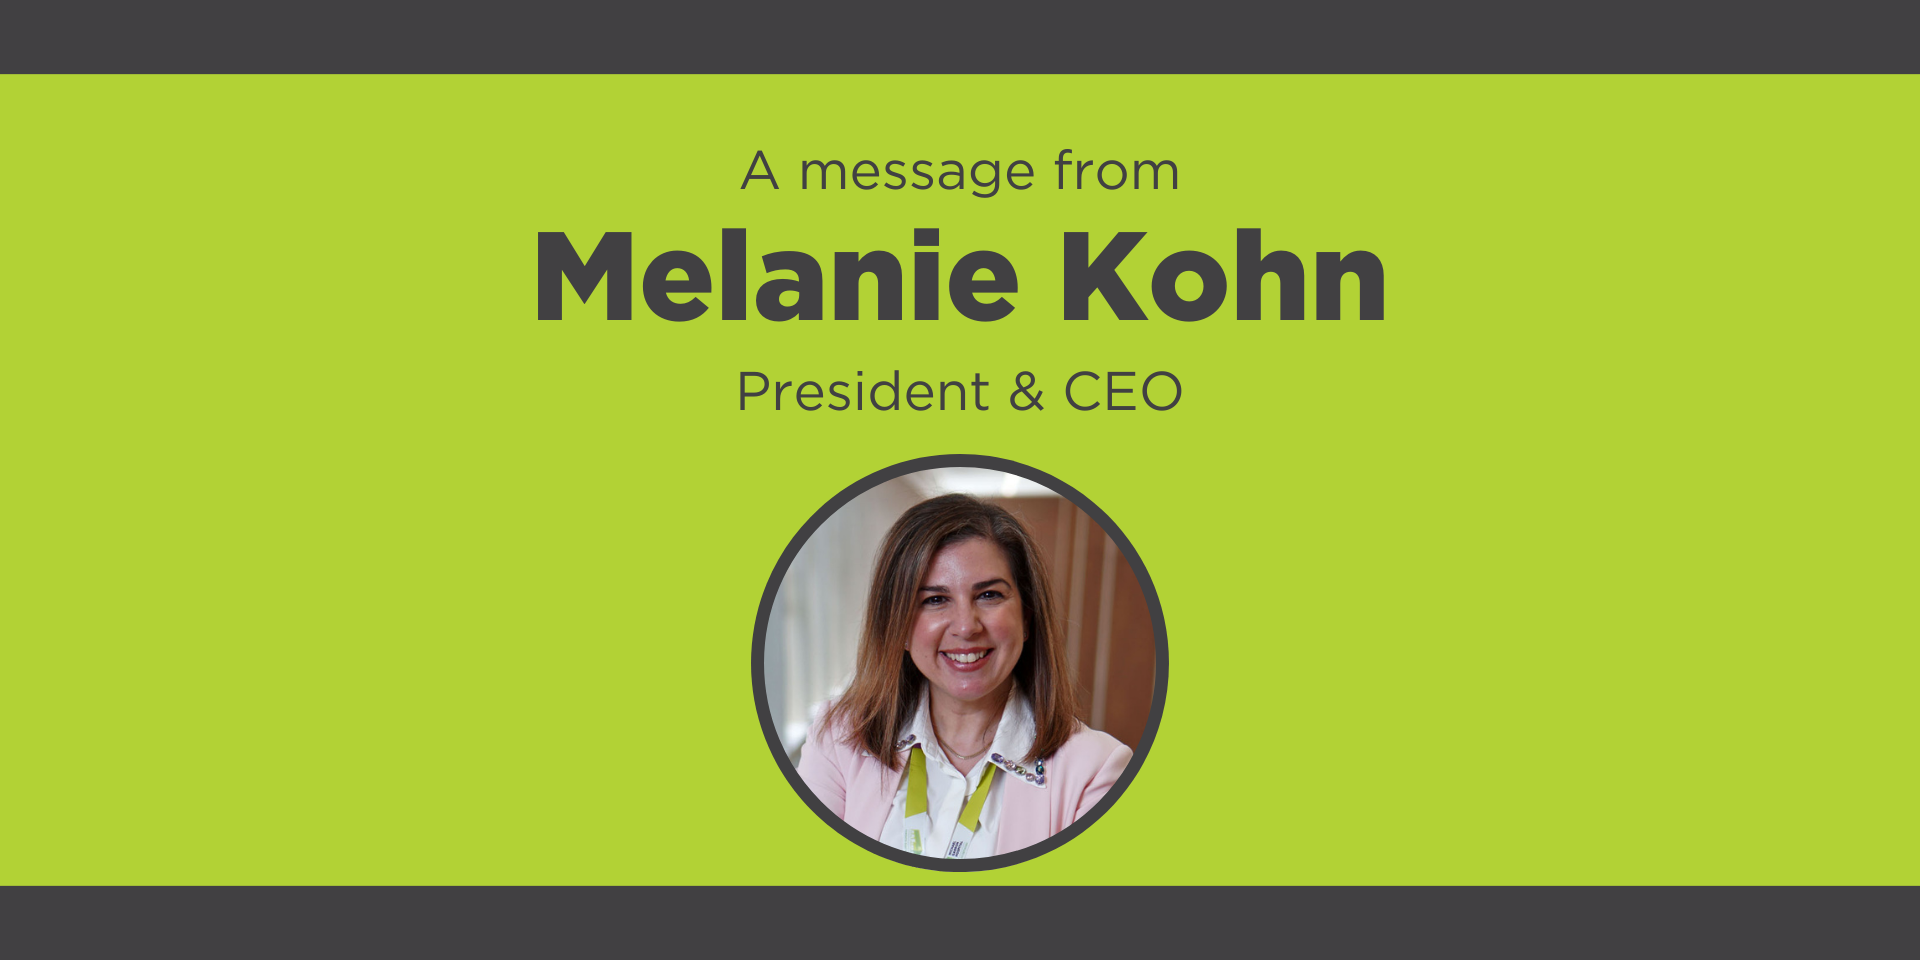 Green graphic with a headshot of Melanie Kohn and text that reads, "A message from Melanie Kohn, President and CEO".